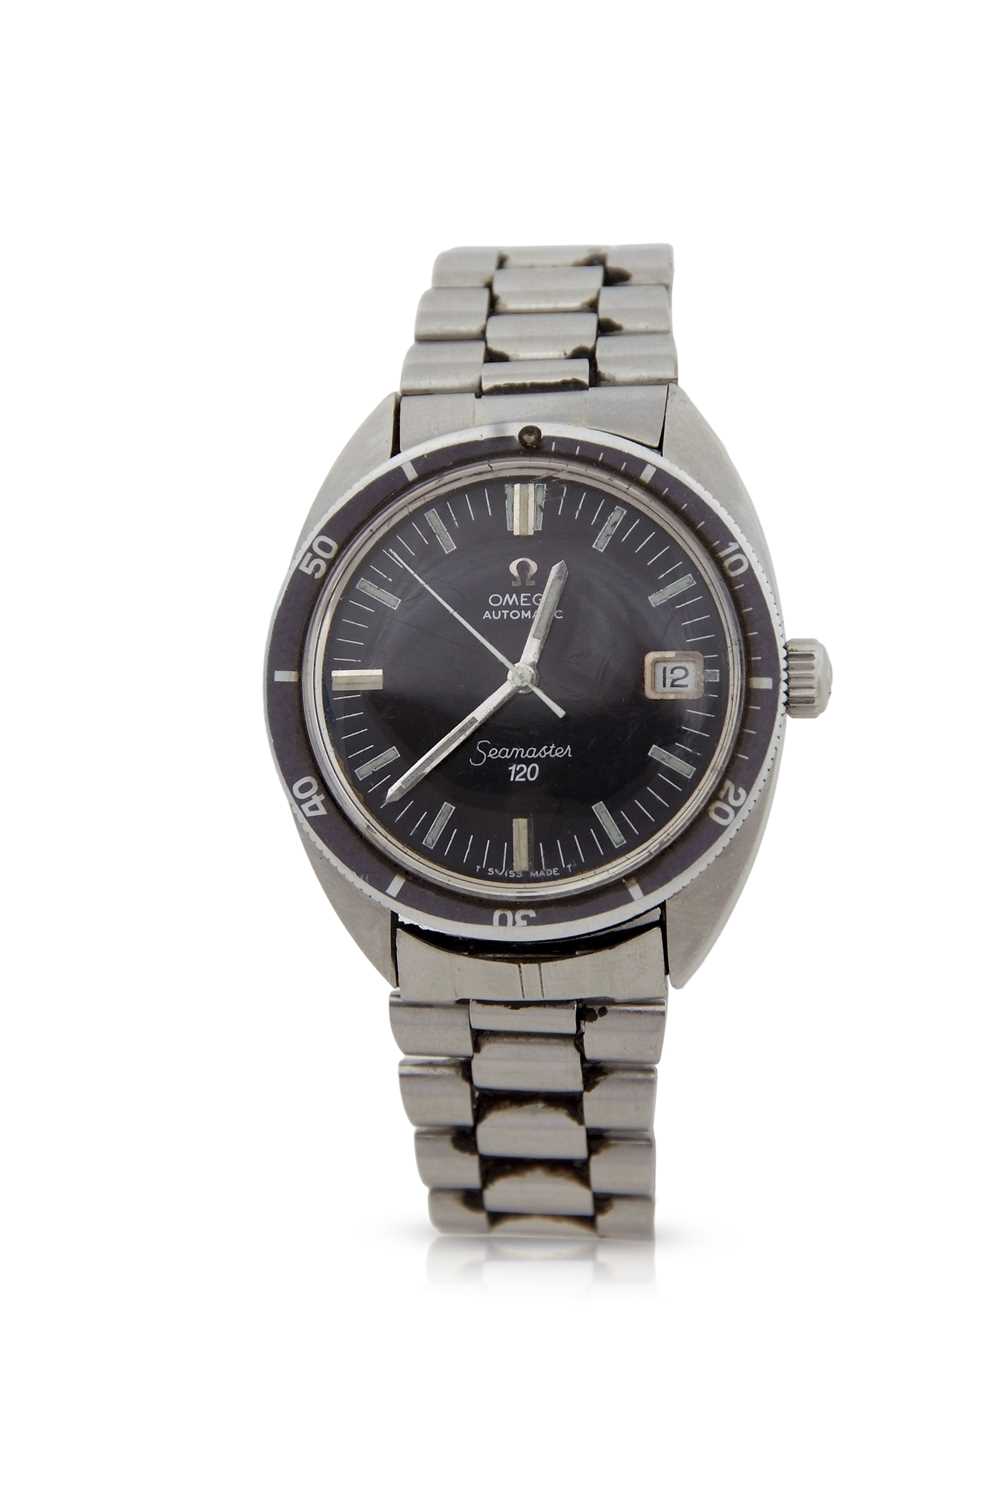 An Omega Seamaster 120 automatic gents wristwatch, circa 1960 to early 1970's, has a 37mm case - Image 6 of 15